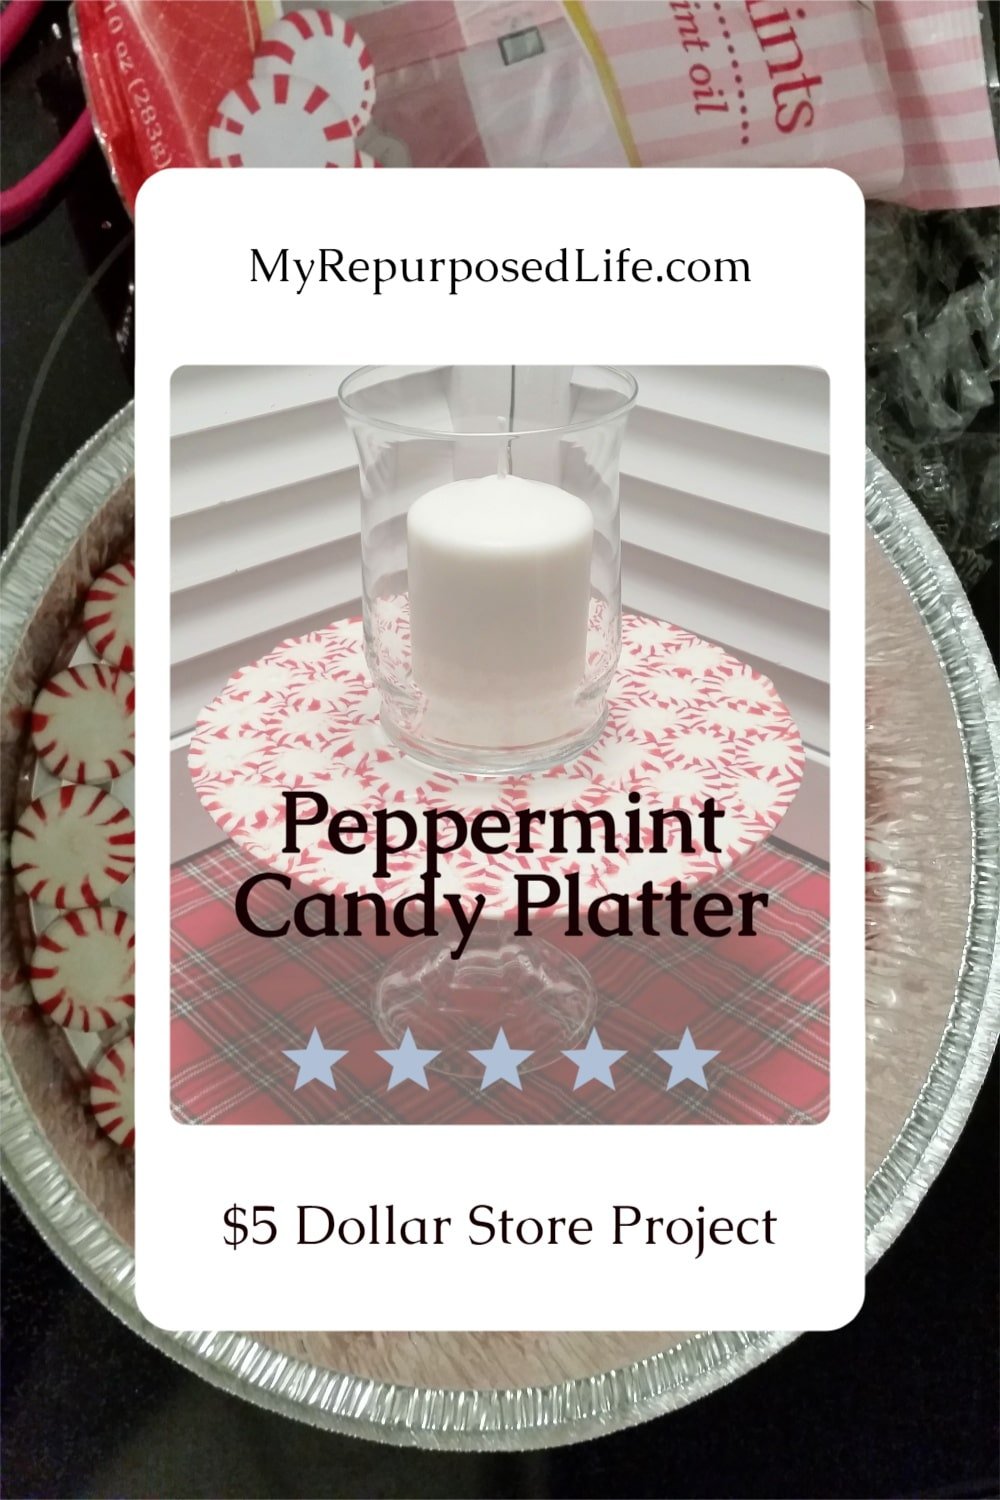 How to make a peppermint patty platter! It's so easy and inexpensive to make. You could make a large one, or several smaller ones, or both!!! Easy & Cheap! #MyRepurposedLife #christmas #easy via @repurposedlife